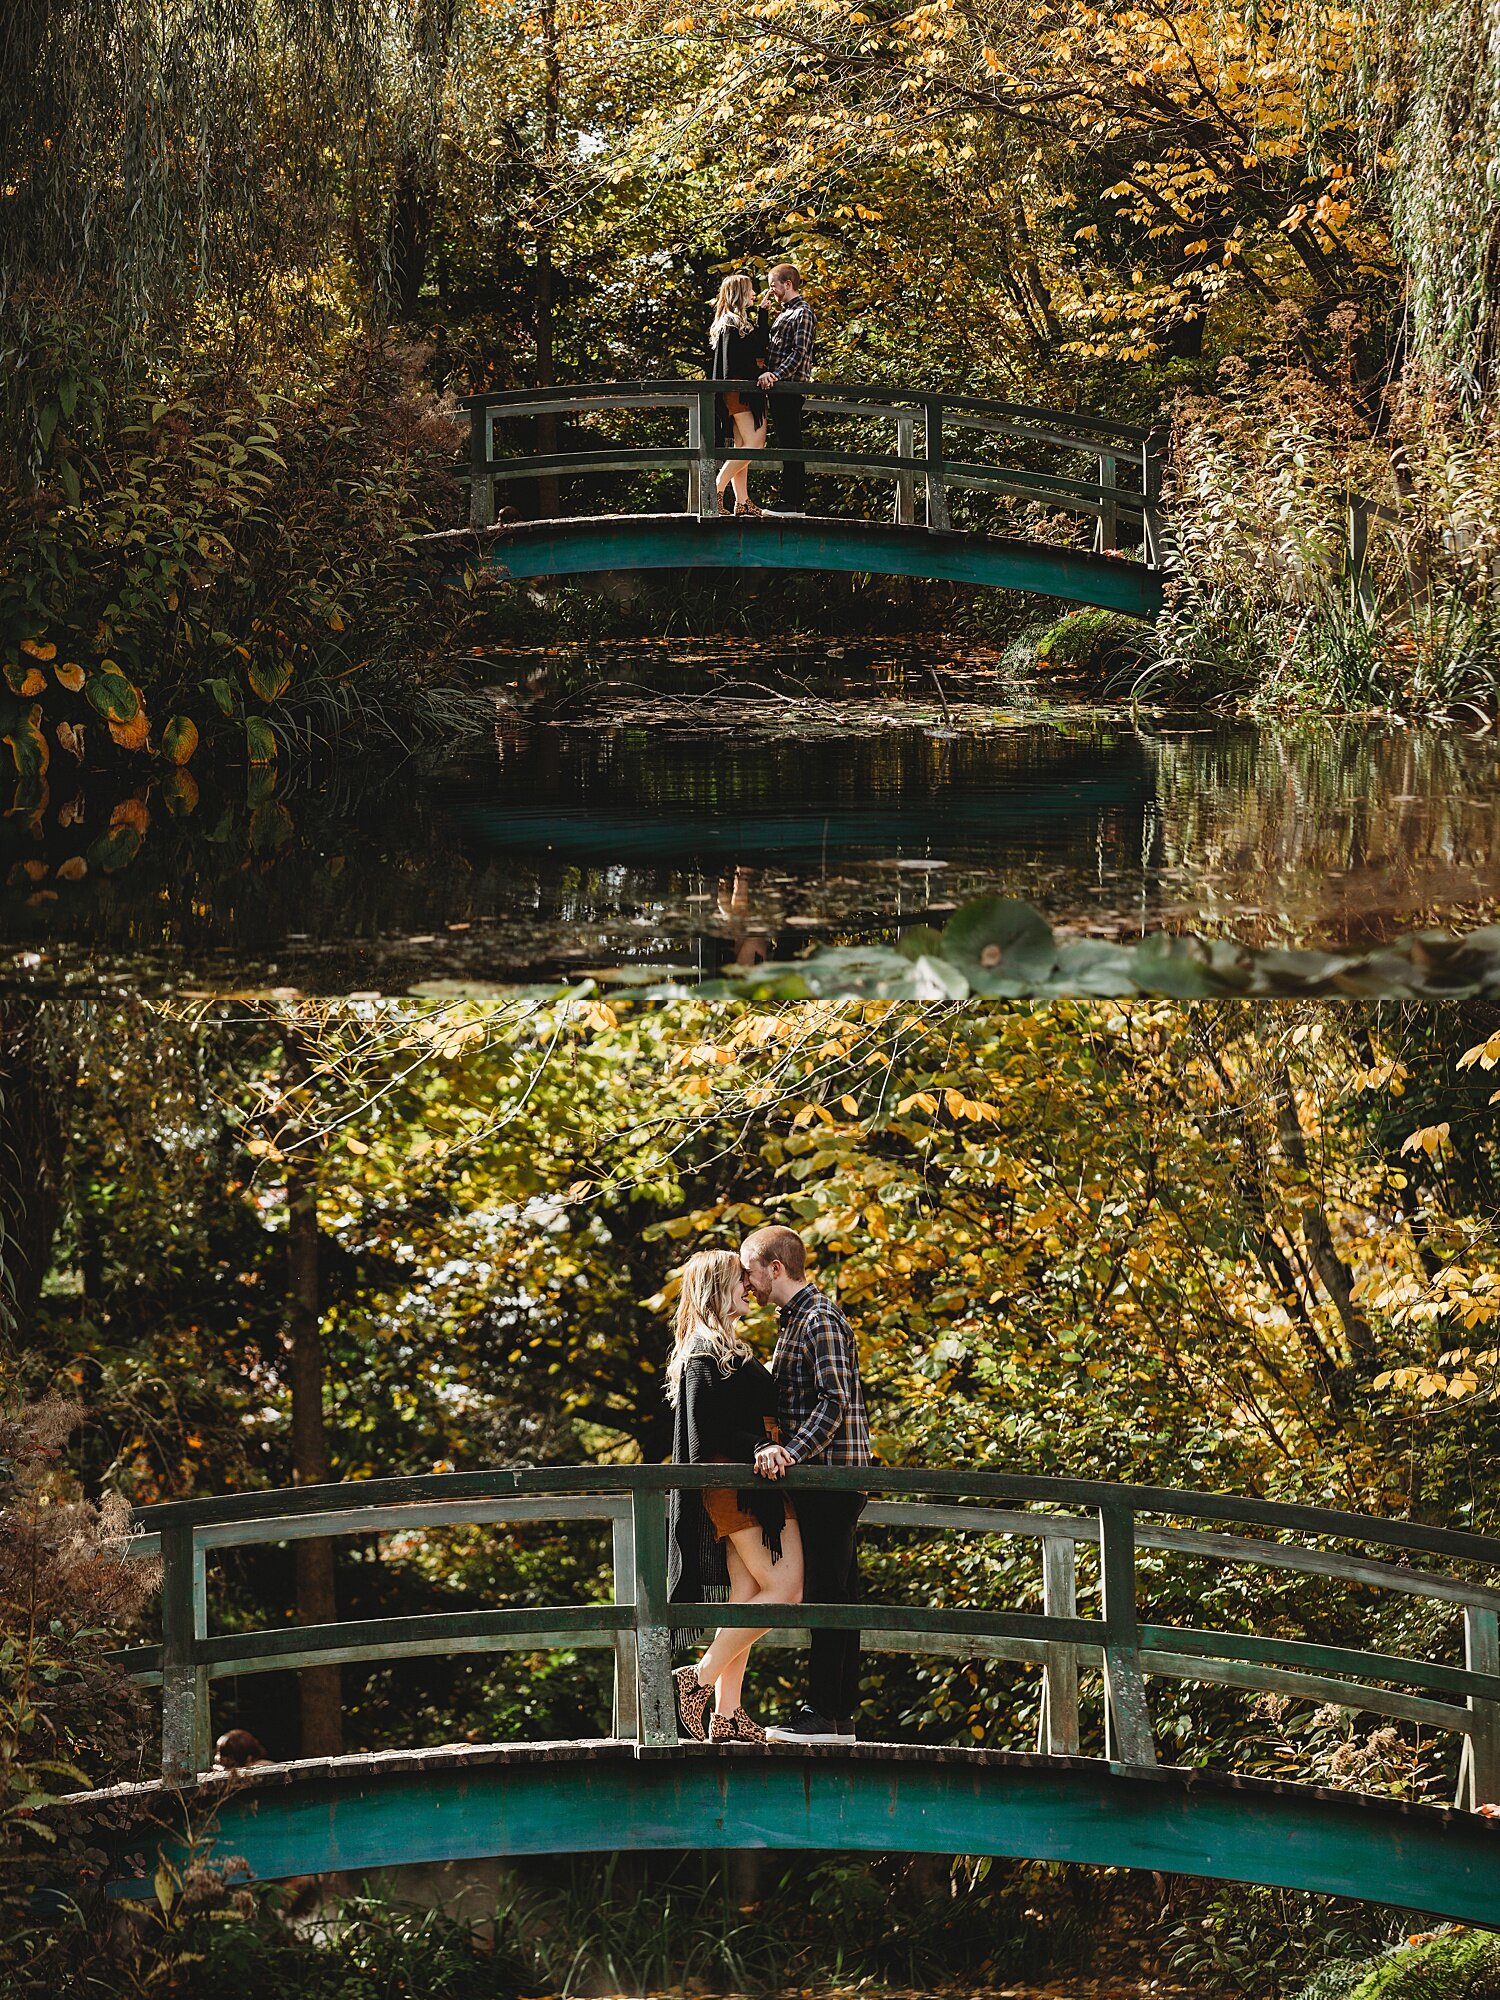 Grounds for Sculpture Hamilton New Jersey NJ engagement session wedding photographer